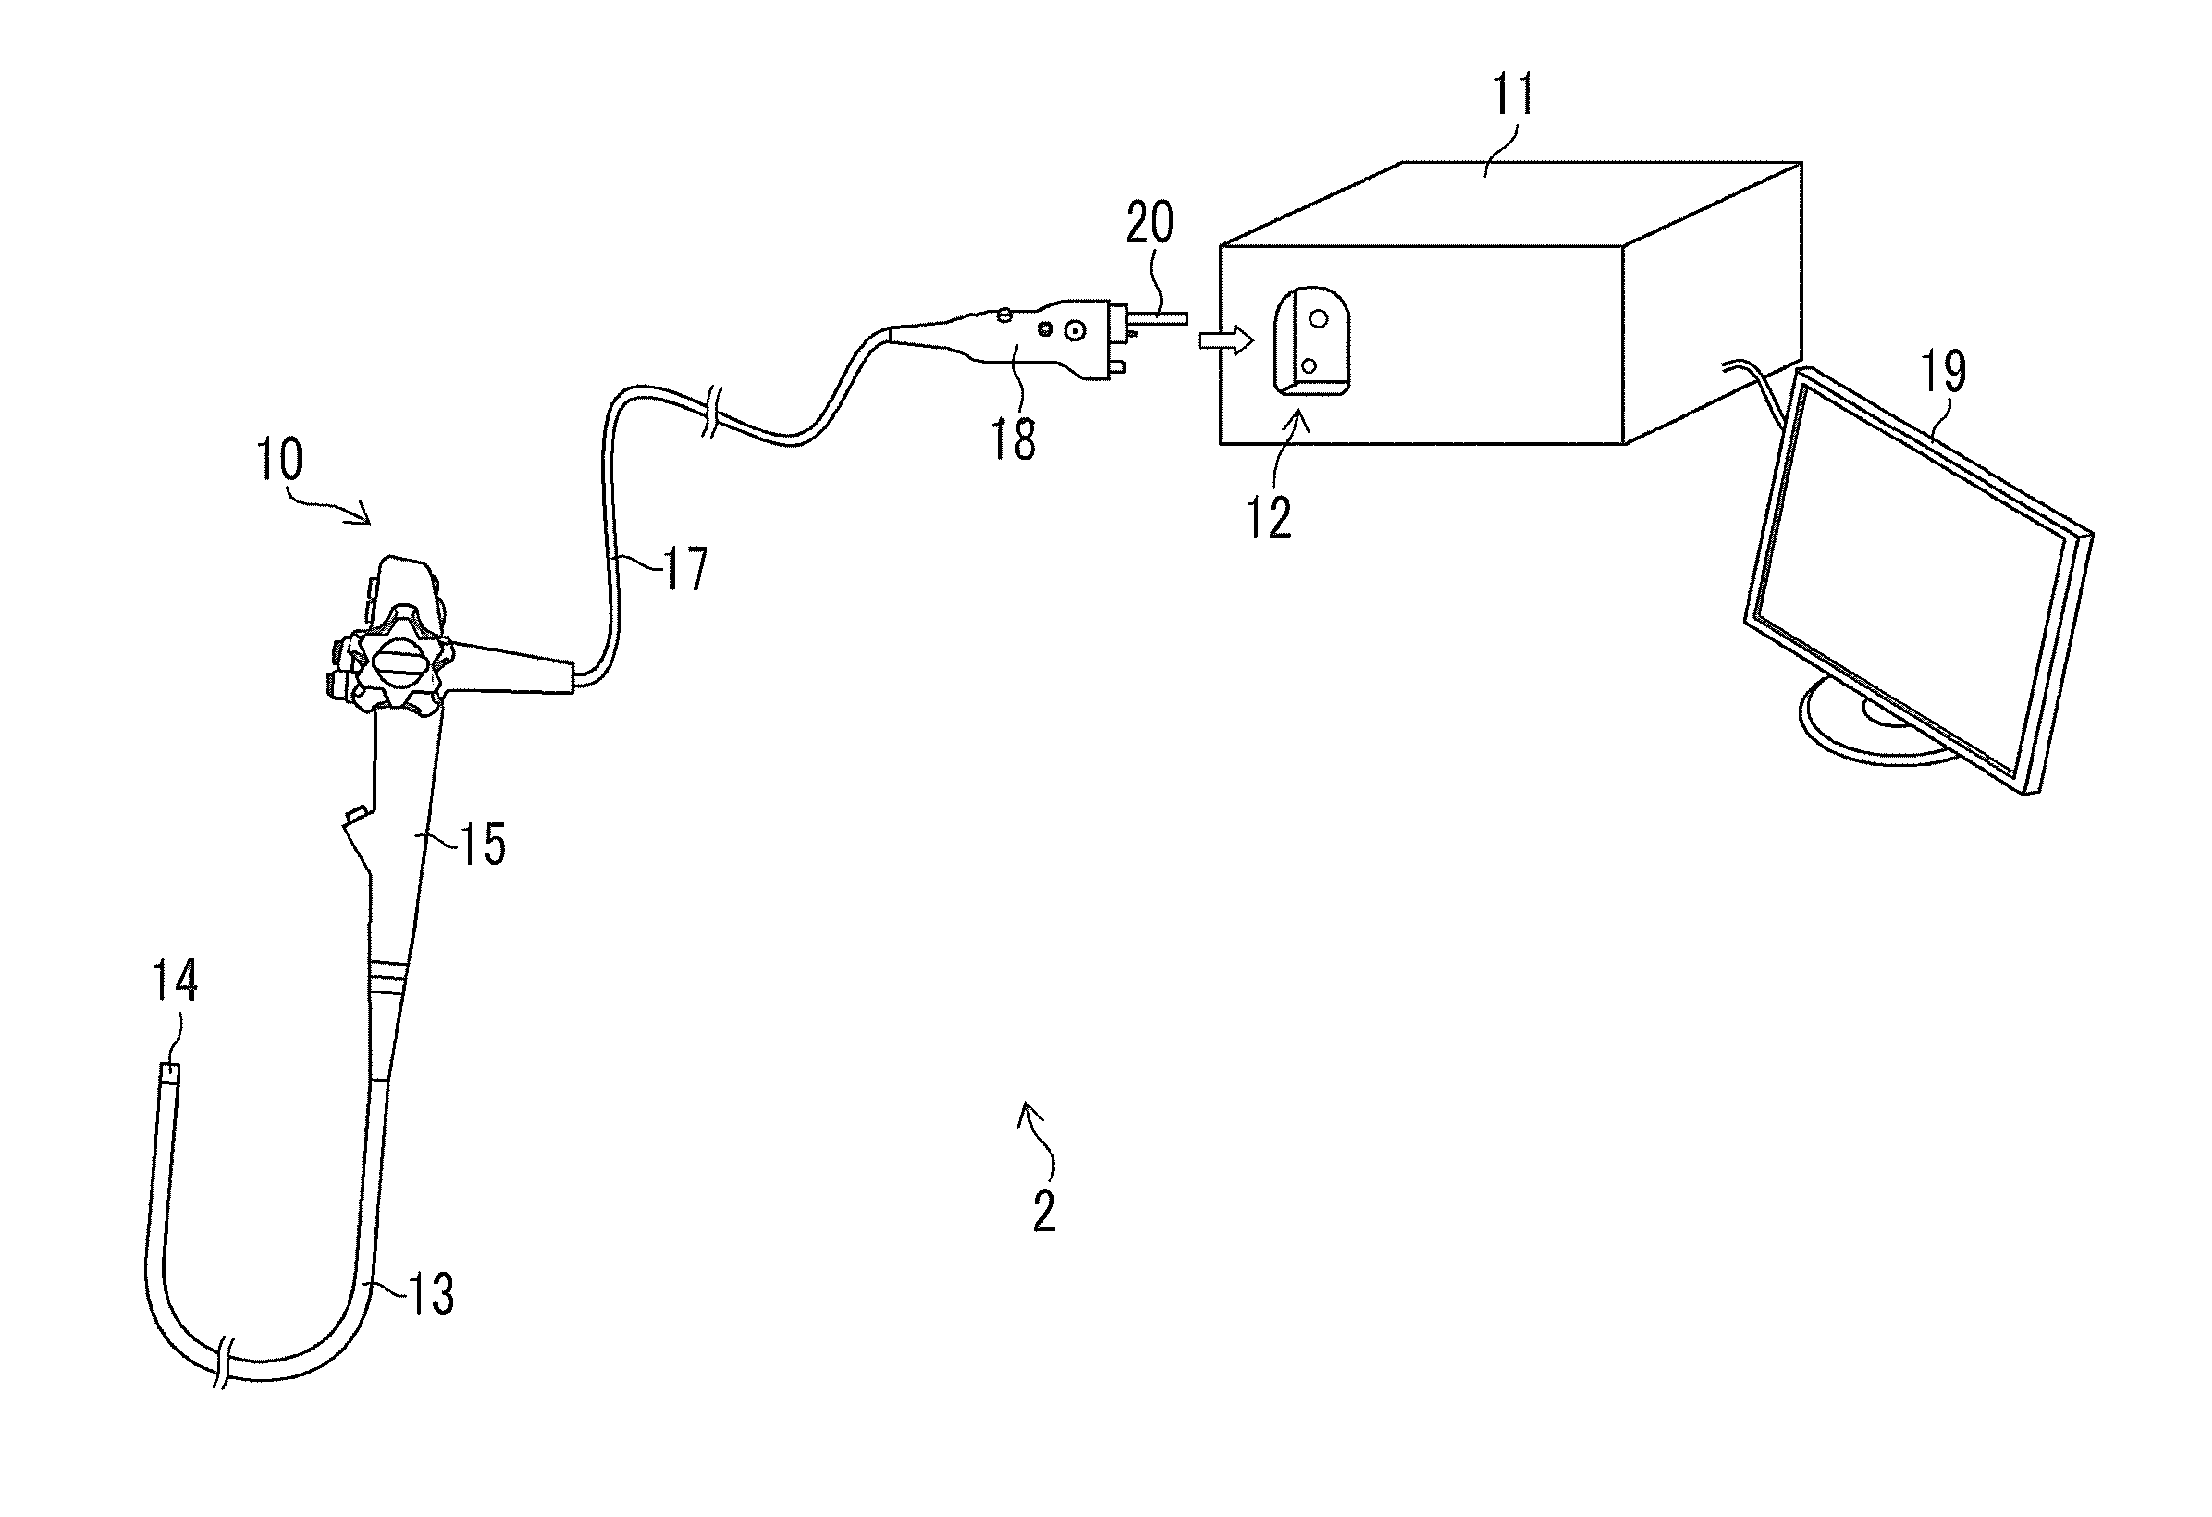 Endoscope system, endoscope, and endoscope connector